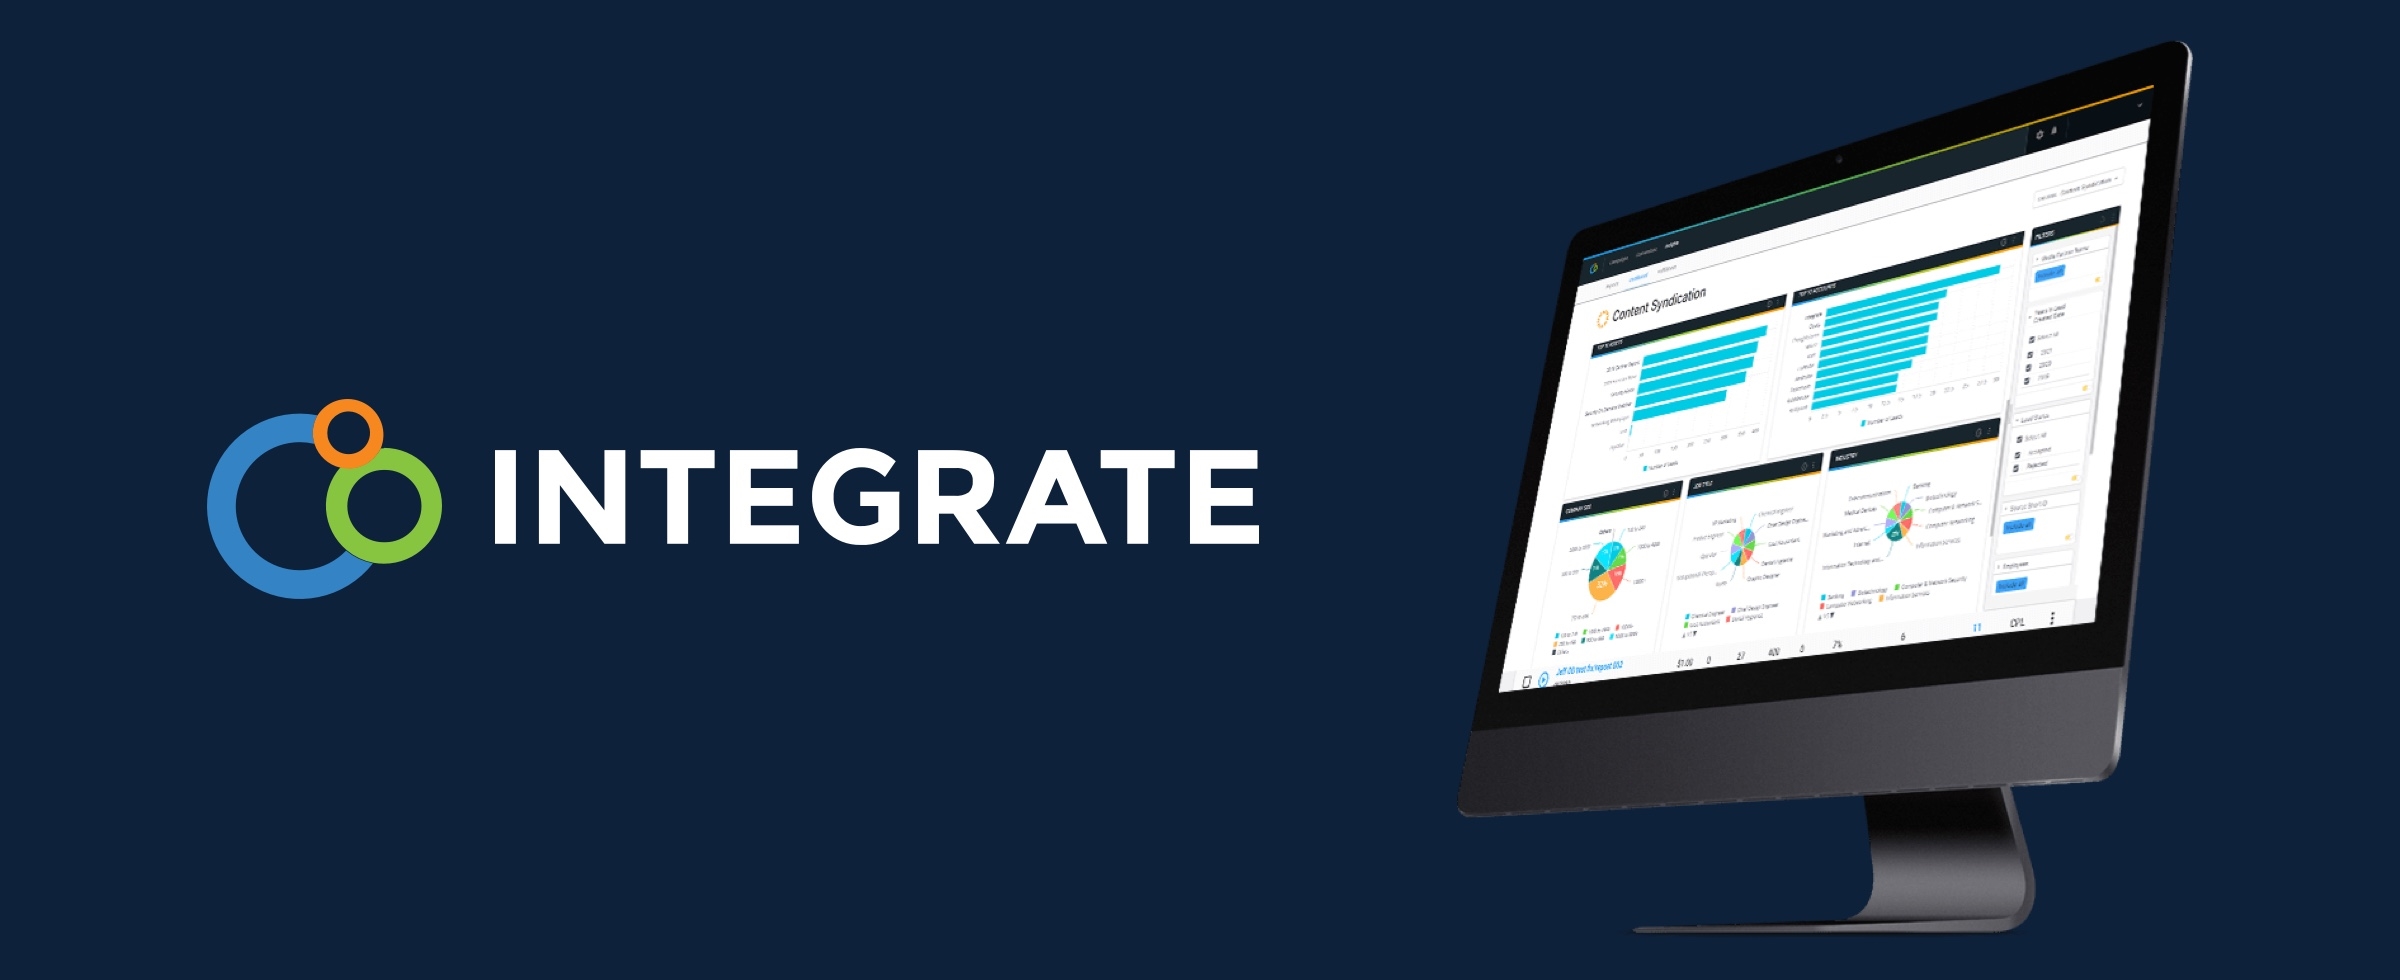 Integrate announces majority investment from Audax | DeviceDaily.com